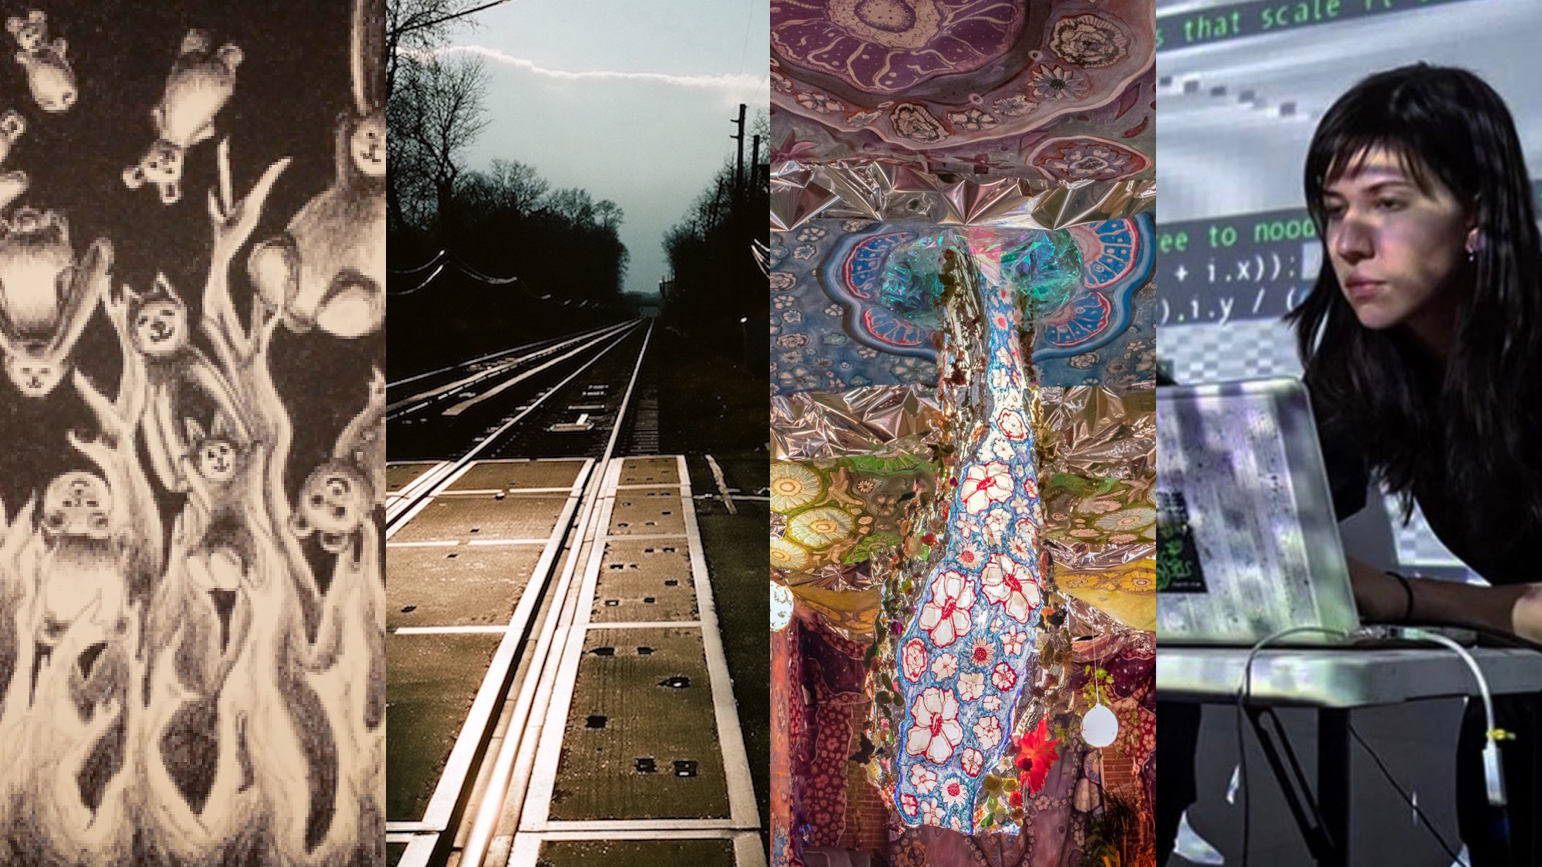 Four artworks: 1) Drawing of stuffed animals and flames; 2) Photograph of train tracks; 3) Colorful abstract work; 4) Photo of a person sitting at a laptop with a screen behind them